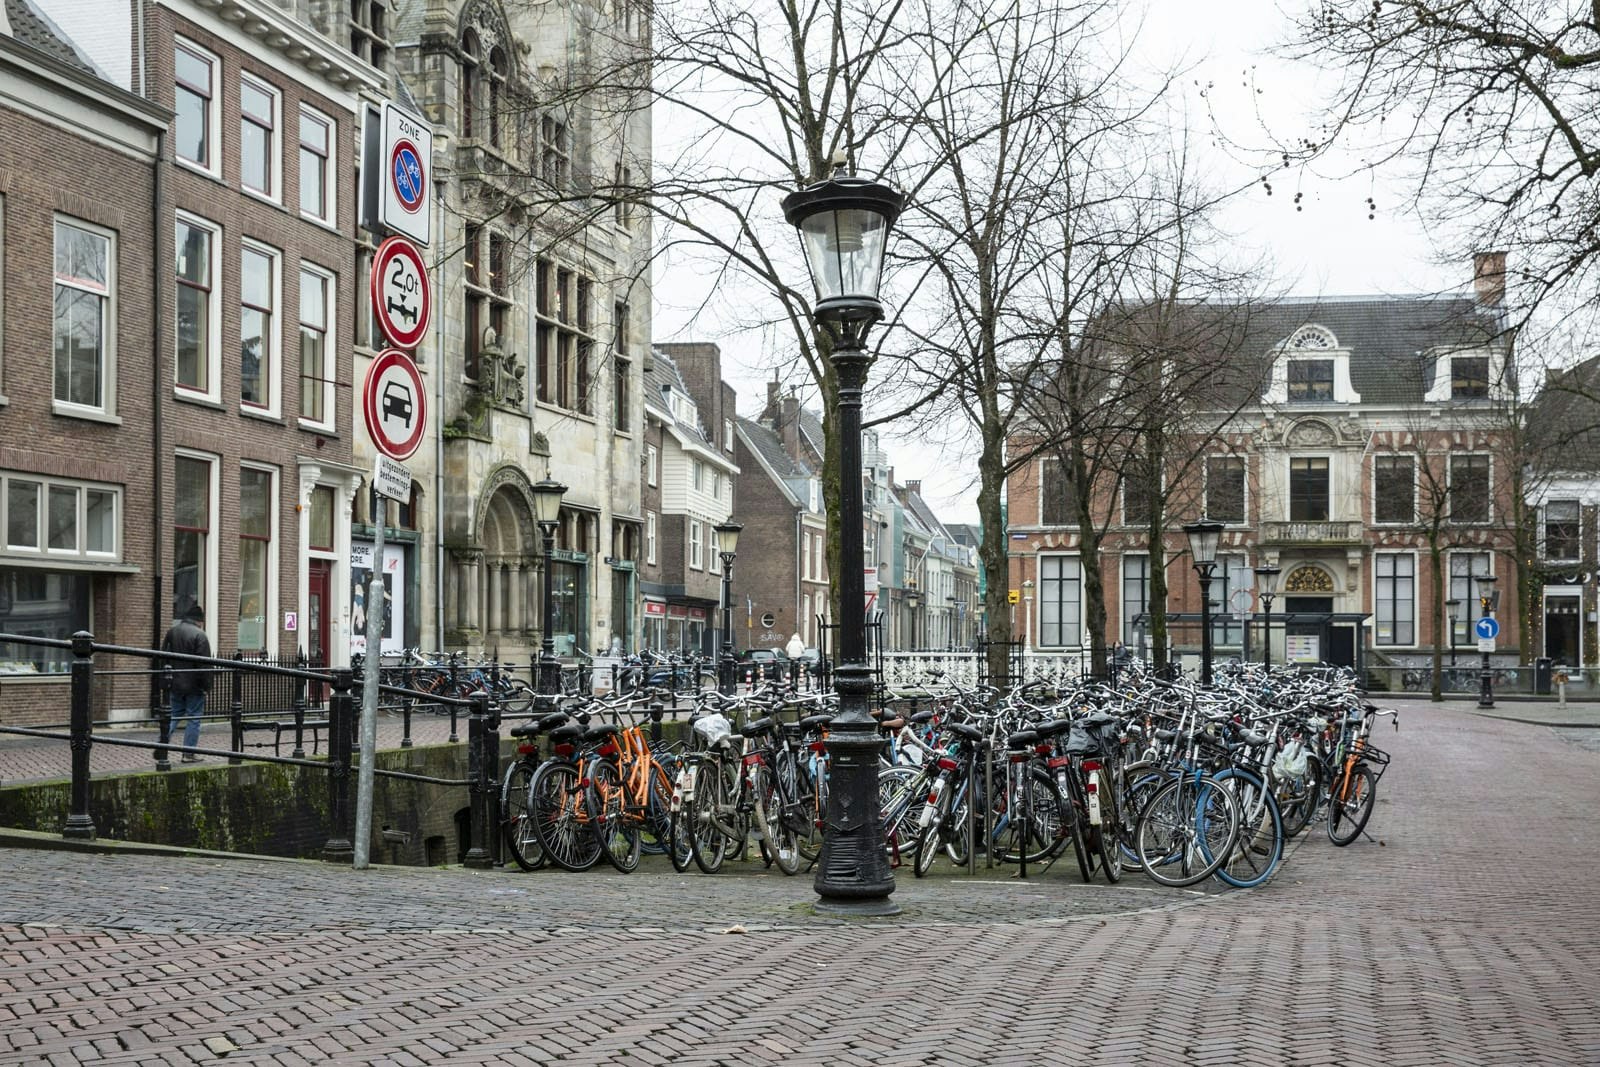 The Janskerkhof in Utrecht will have a different design;  Gone will be 26 parking spaces and more bike racks